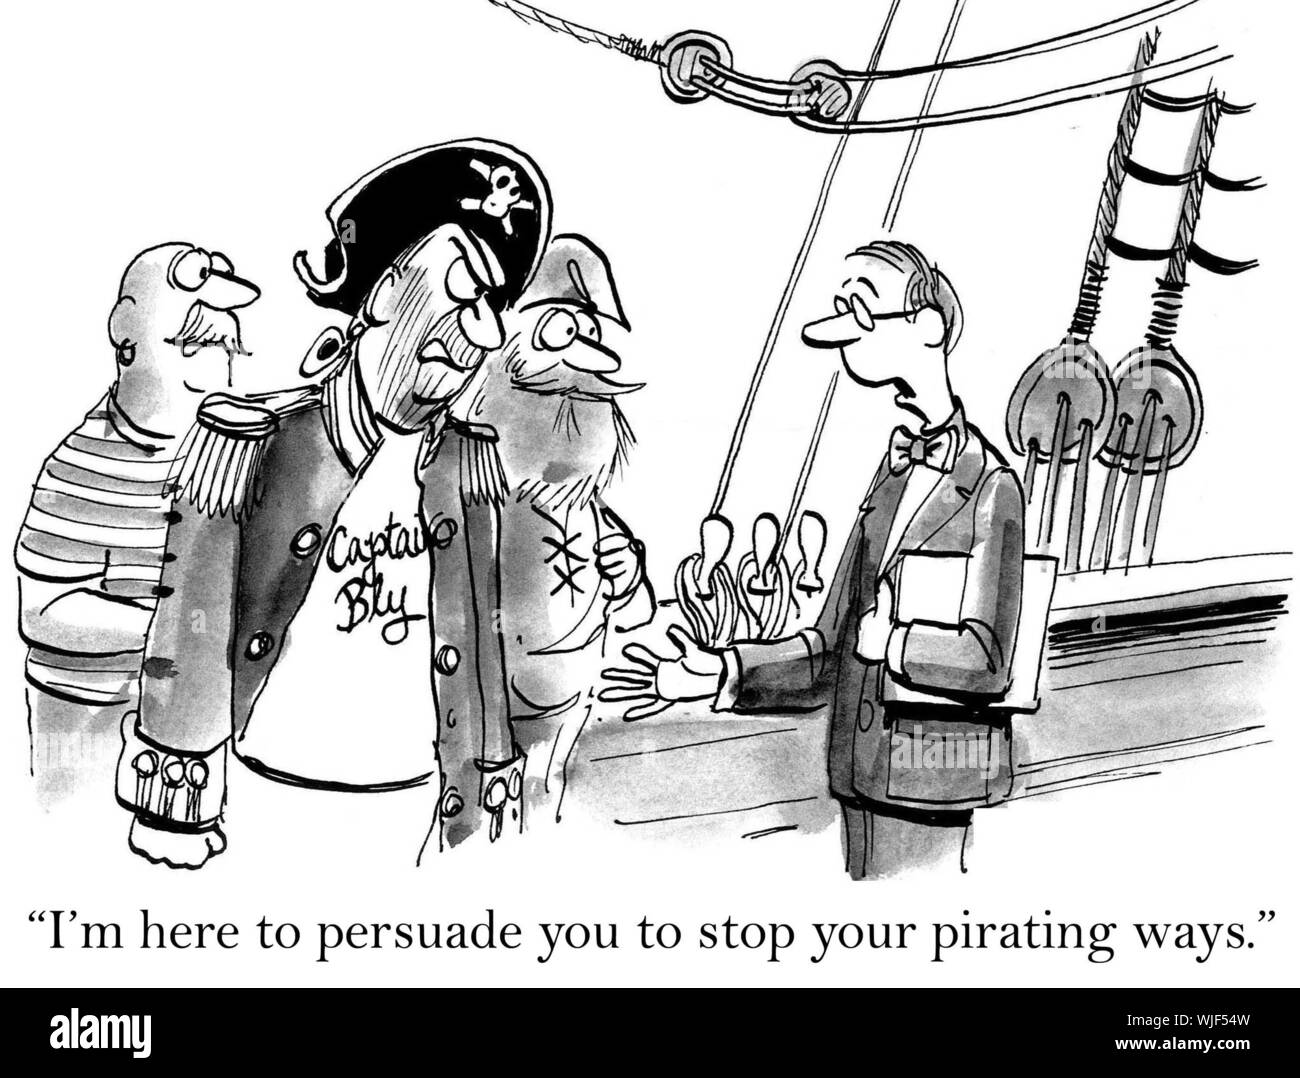 'I'm here to persuade you to stop your pirating ways.' Stock Photo